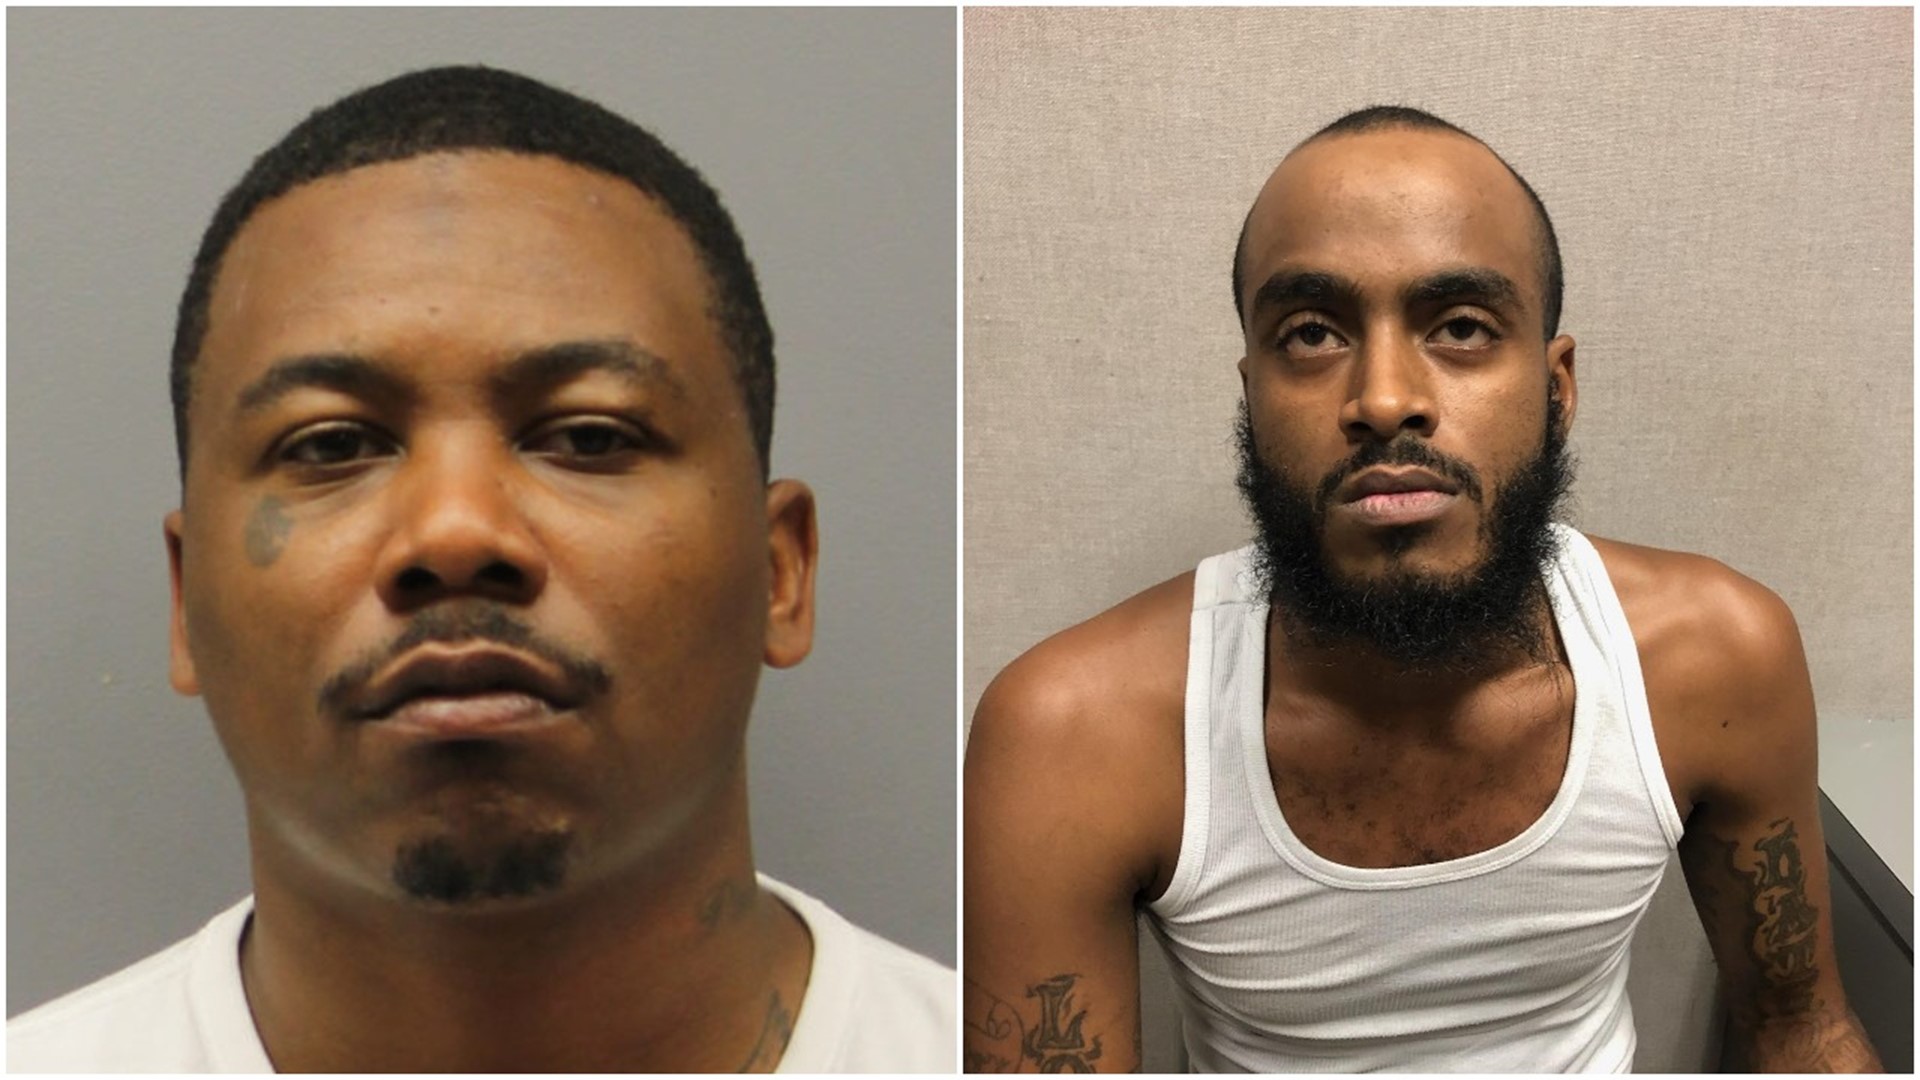 Prince George's County police make an arrest in a shooting that took place in Suitland. Tavone Hoes, 26, and Gregory Sam, 25, are charged with first-degree murder in the death of Mshairi Alkebular Junior. Alkebular was shot and killed leaving a funeral on Aug. 5. Both Hoes and Sam were arrested in DC and they're awaiting extradition to Prince George's County.